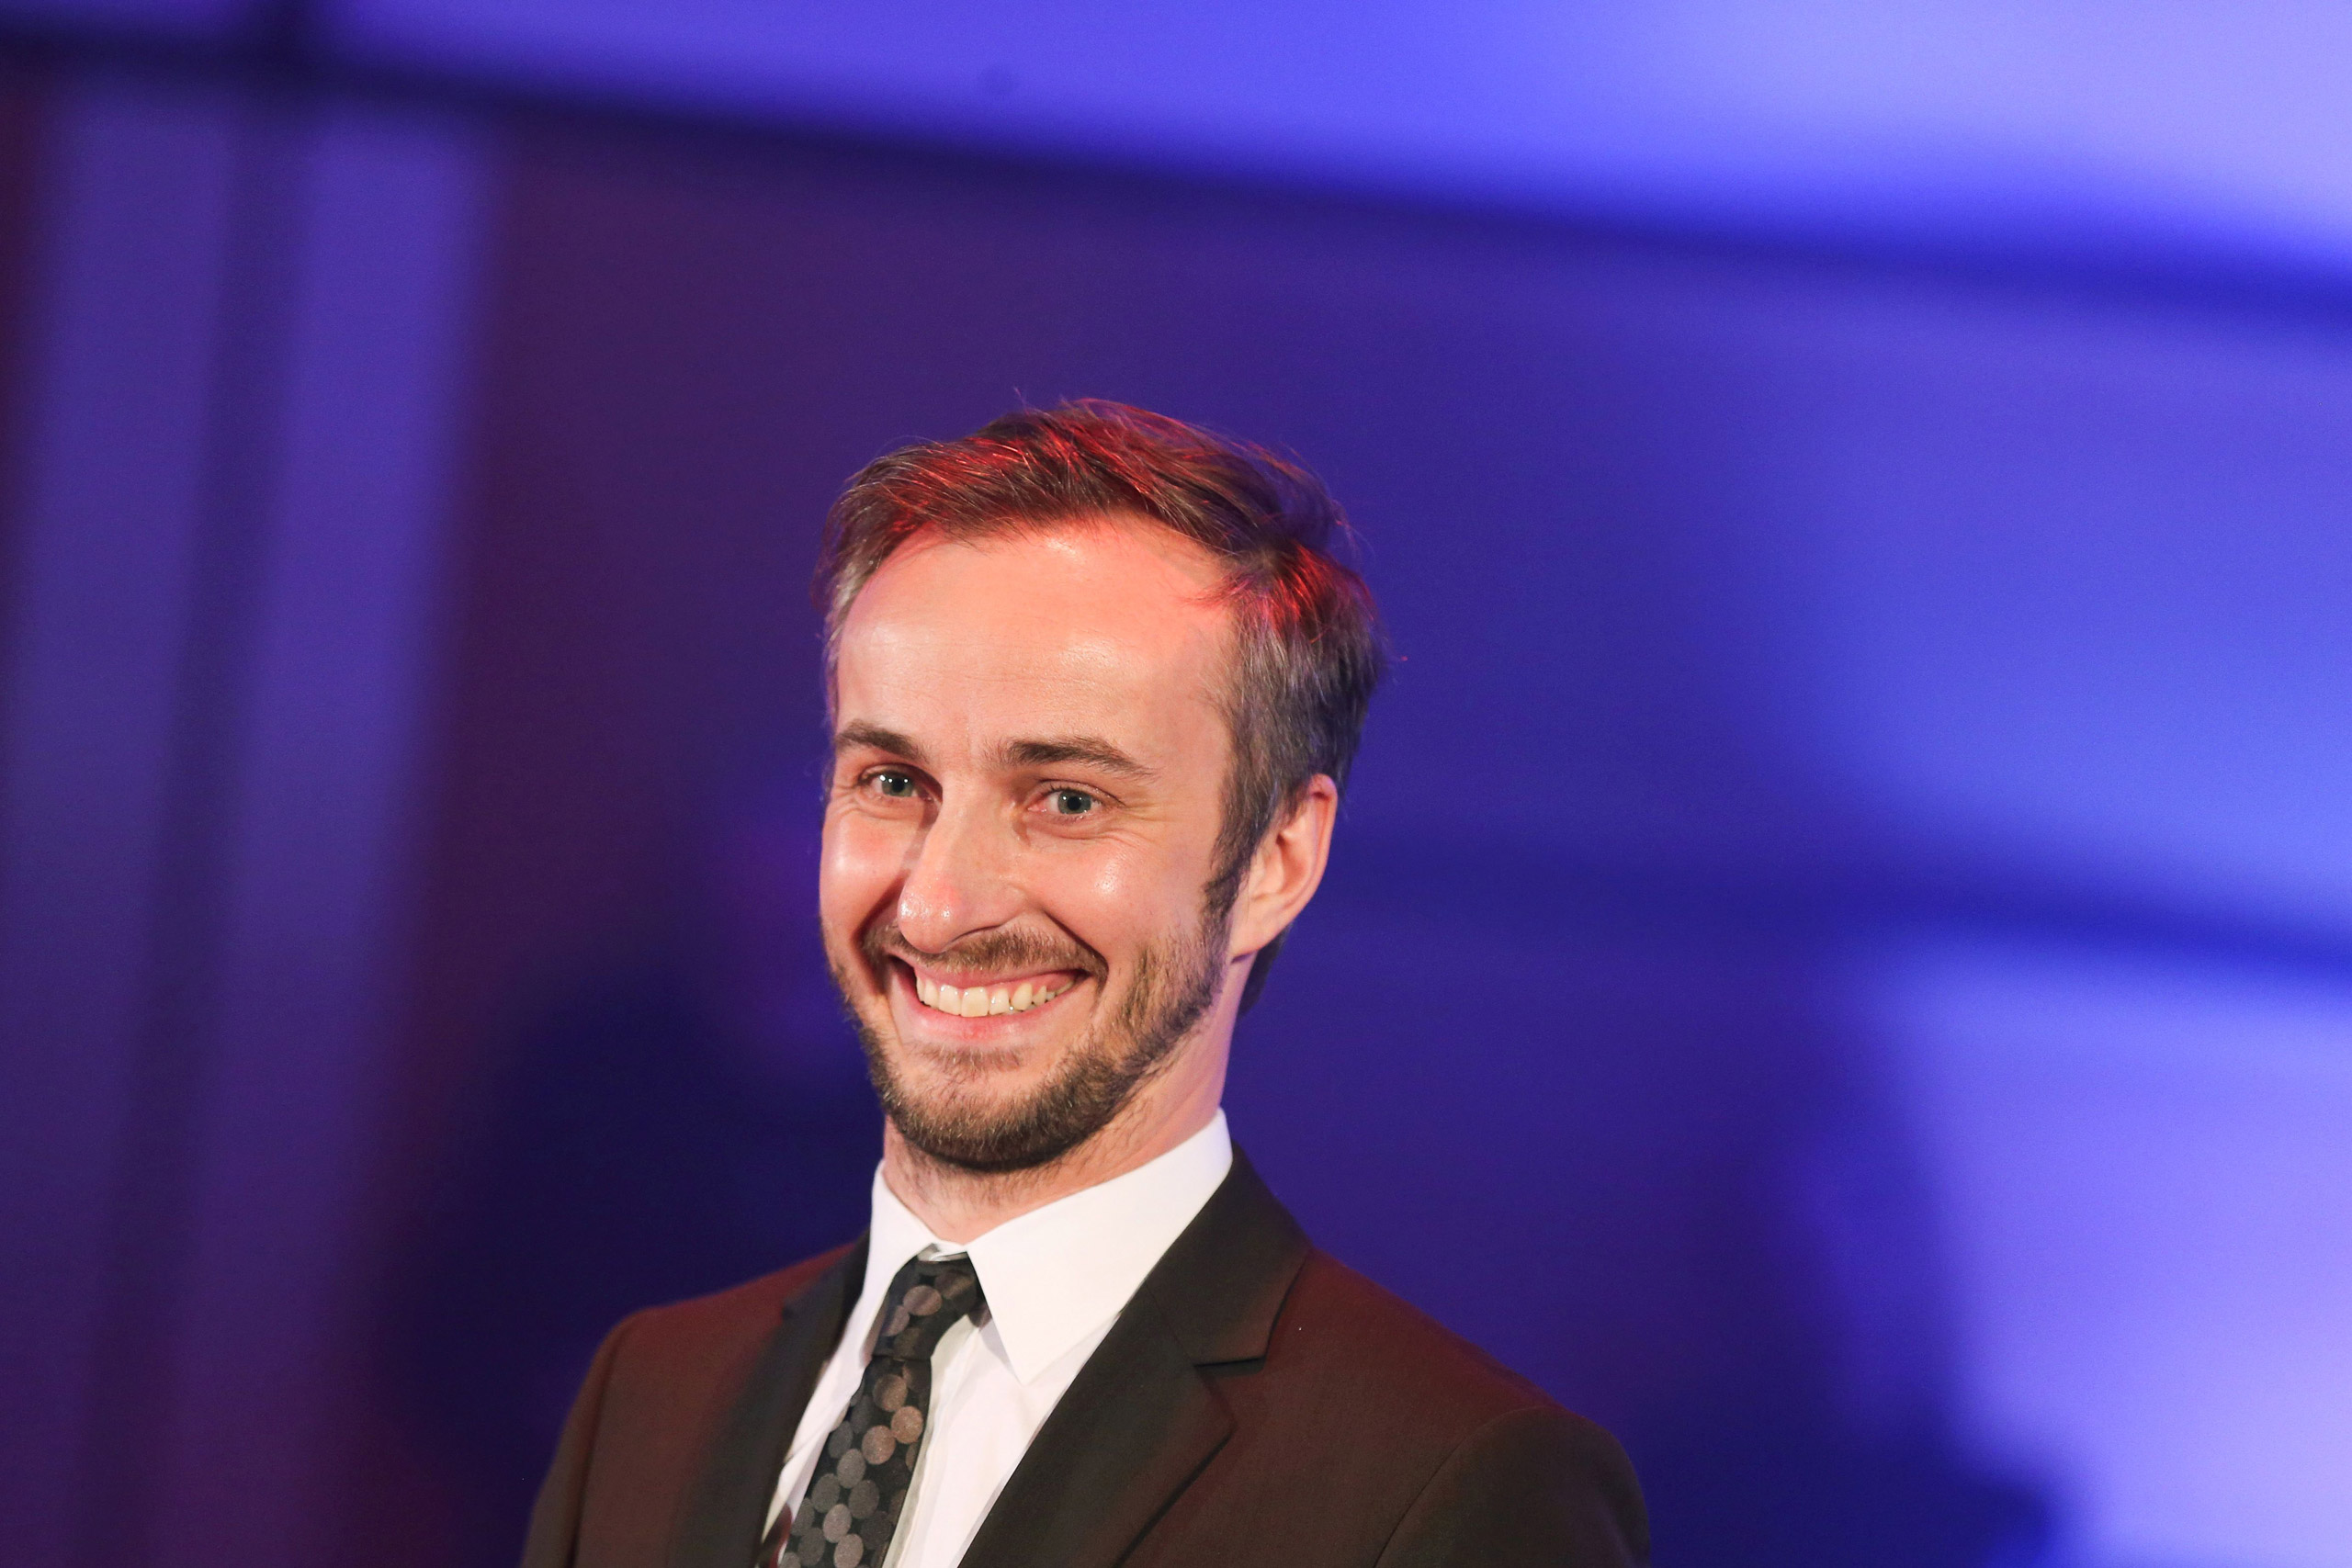 Picture taken on January 13, 2016 shows German TV comedian Jan Boehmermann during an award ceremony in Duesseldorf, western Germany. Chancellor Angela Merkel on April 15, 2016 authorised a Turkish demand for criminal proceedings against Boehmermann over a crude satirical poem about President Recep Tayyip Erdogan in a bitter row over free speech. / AFP / dpa / Rolf Vennenbernd / Germany OUT        (Photo credit should read ROLF VENNENBERND/AFP/Getty Images)